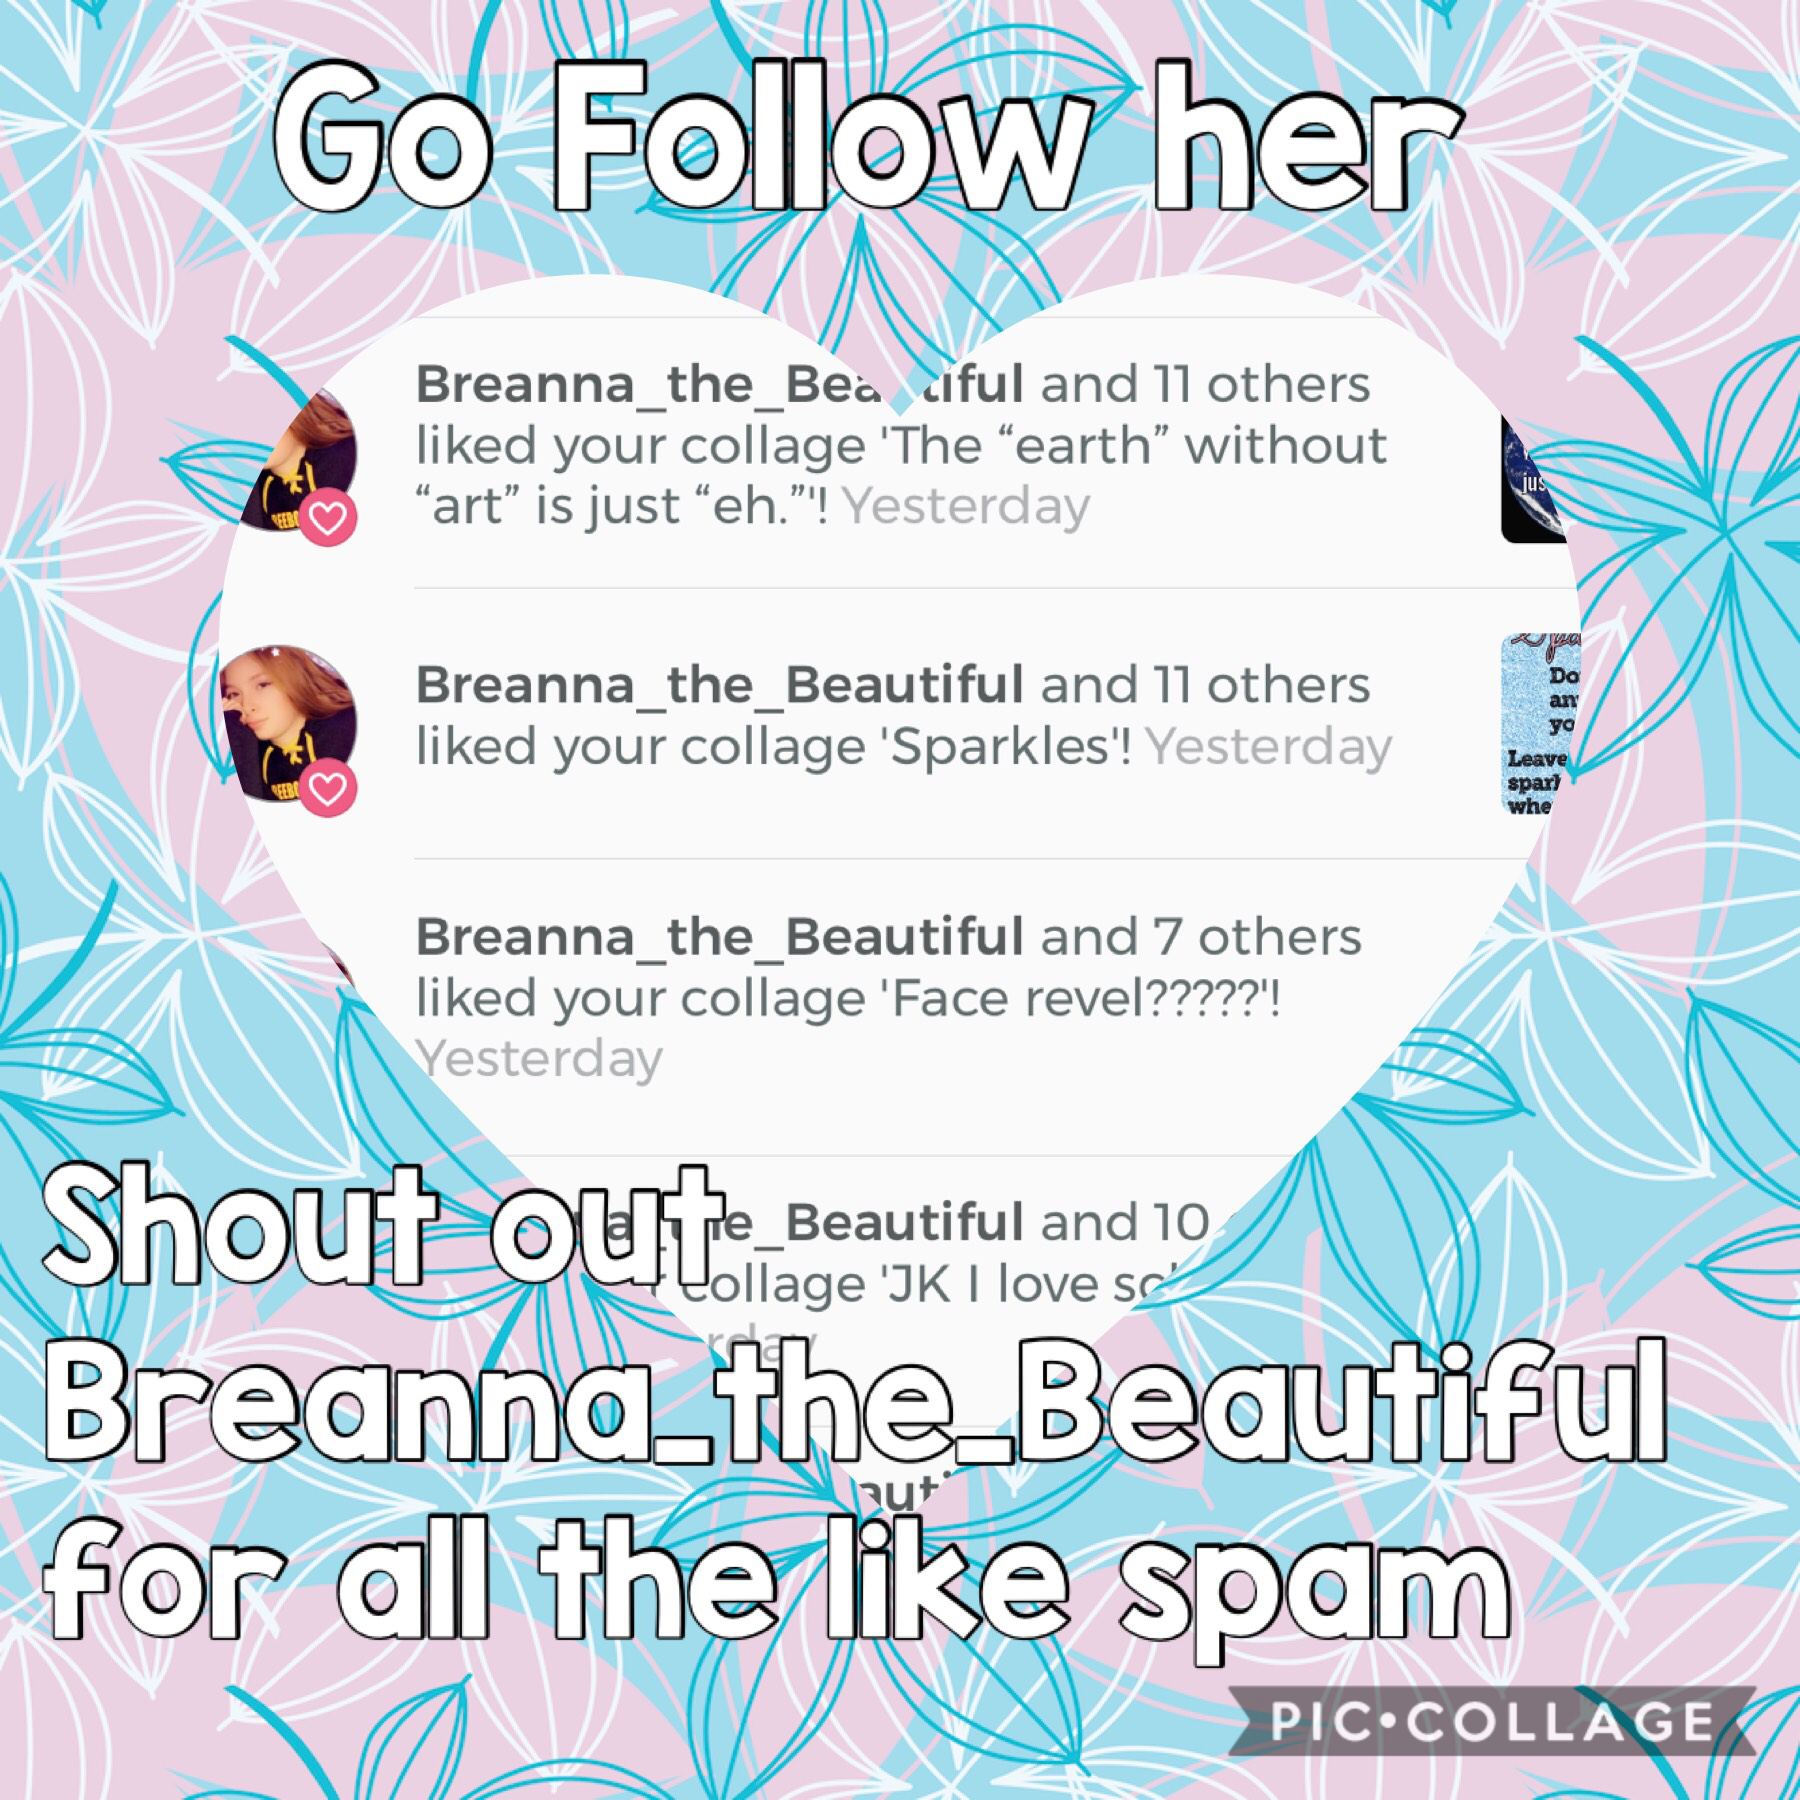 Thank you Breanna_the_Beautiful 